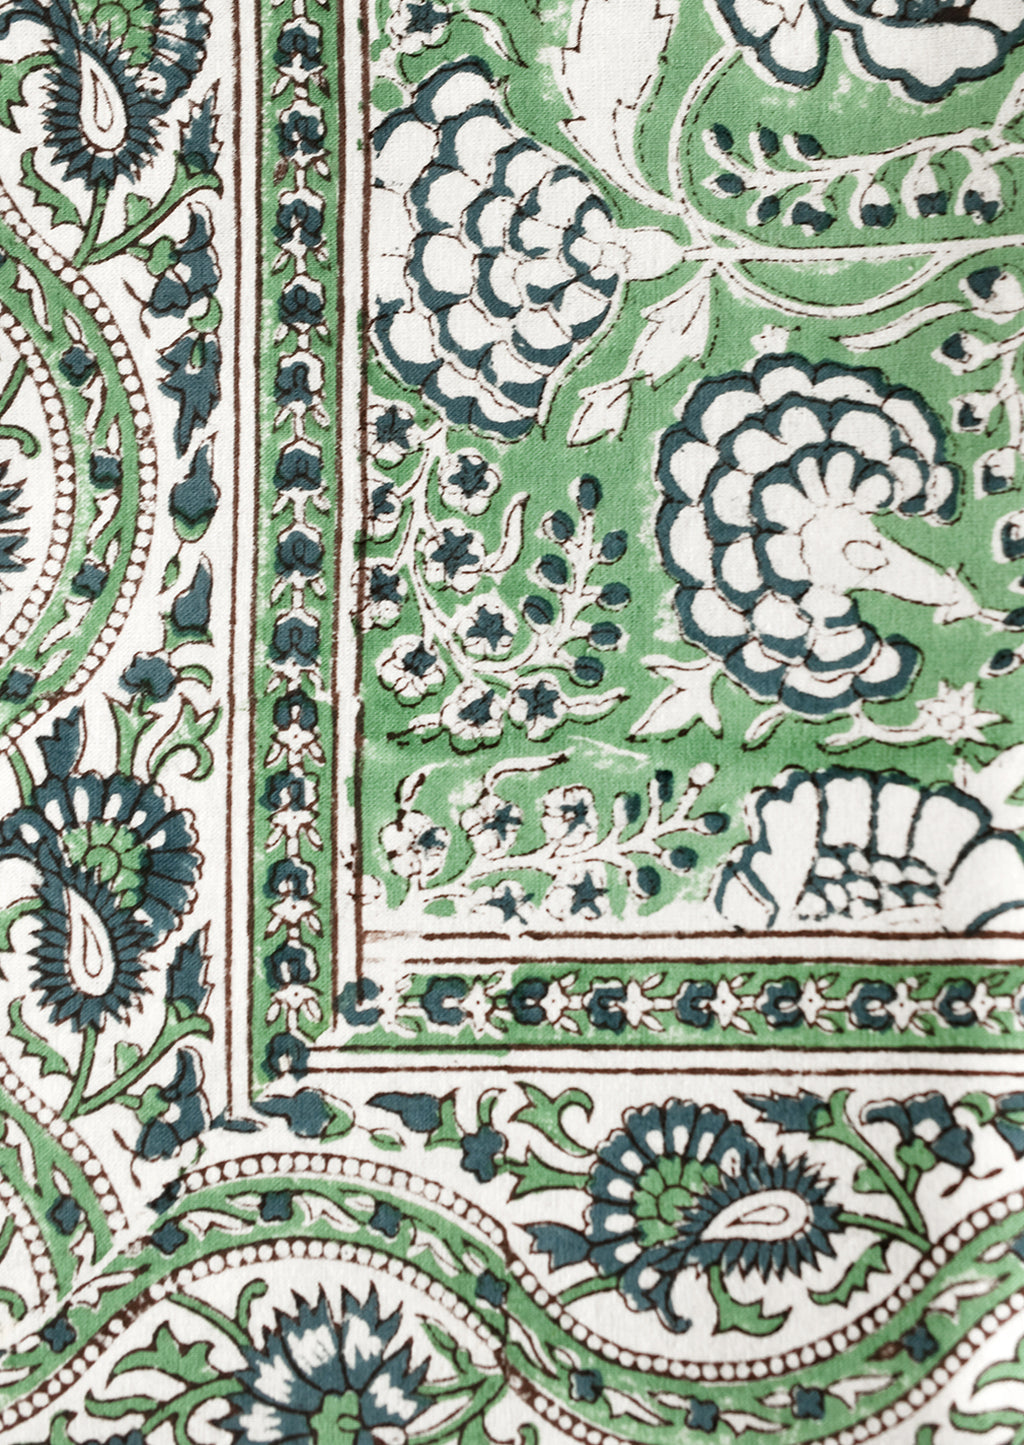 4: A block printed tablecloth with traditional print in blue and green shades.